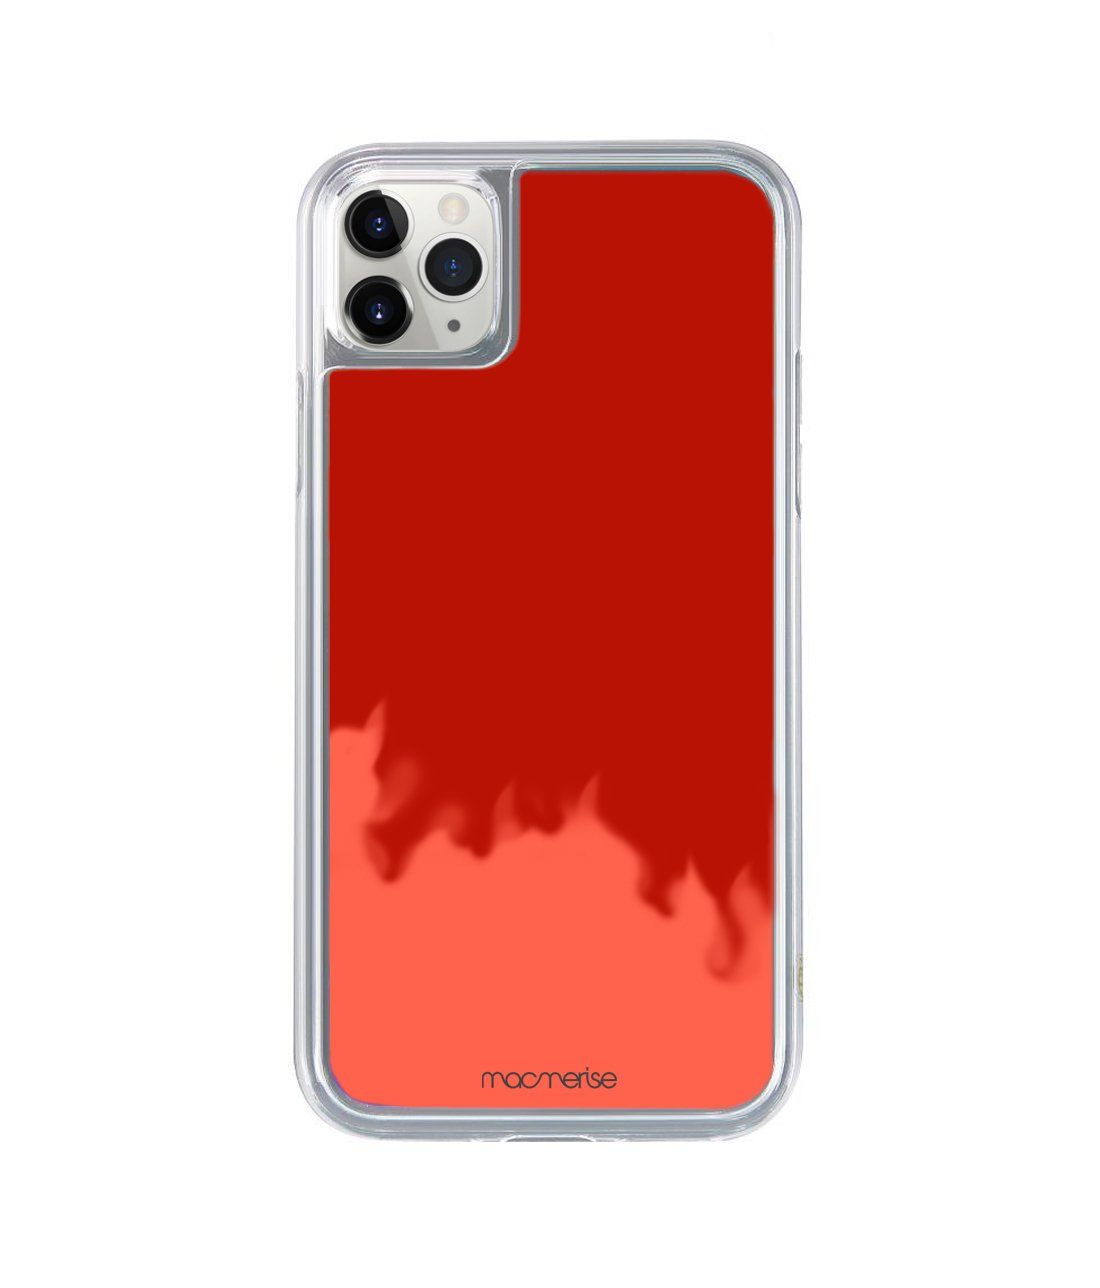 Neon Sand Red - Neon Sand Phone Case for iPhone 11 Pro